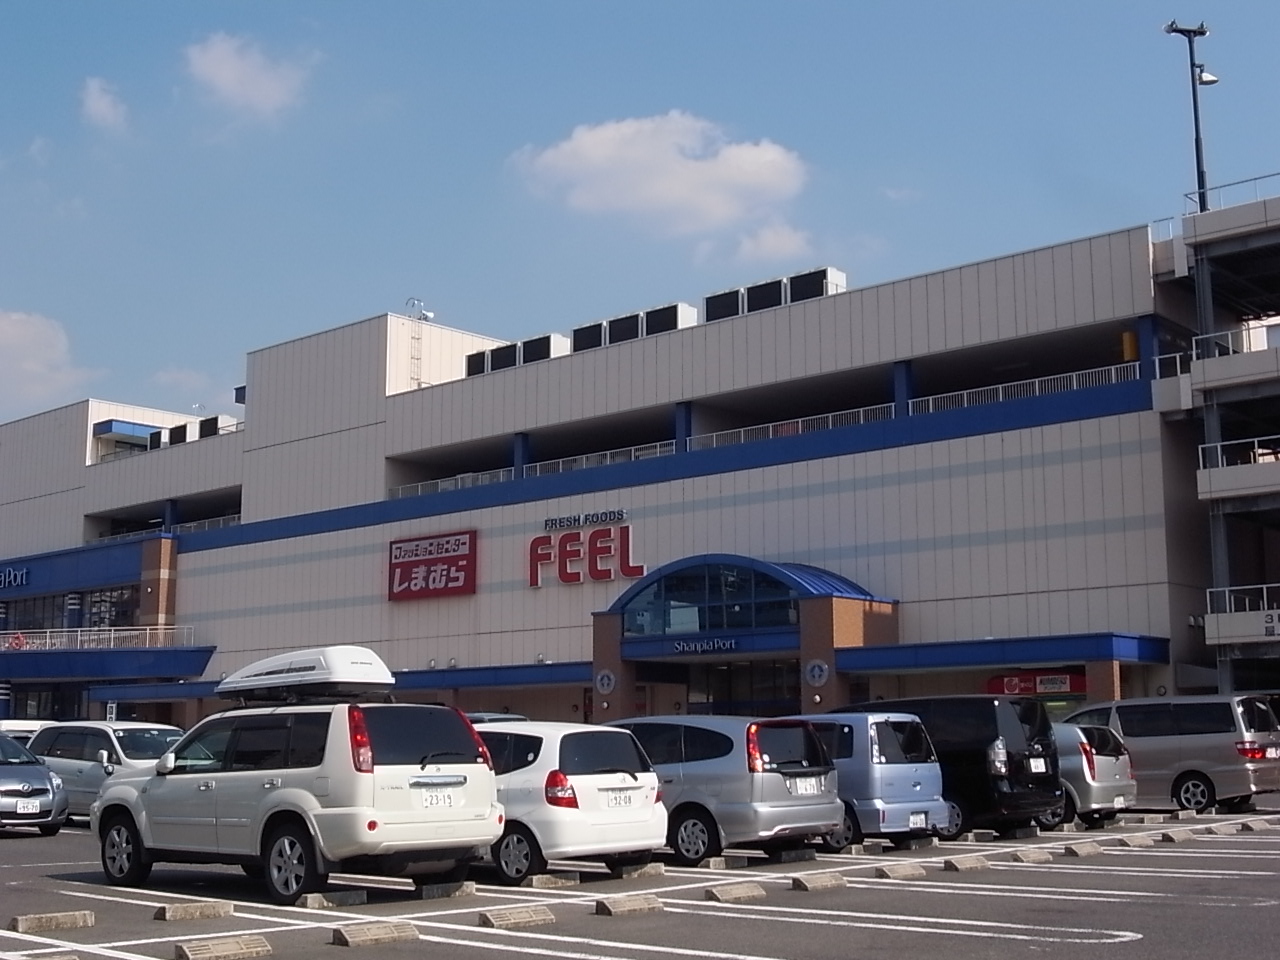 Shopping centre. Shan peer port (Uniqlo ・ Aiden ・ 800m up to 100 yen Daiso store Available (shopping center)